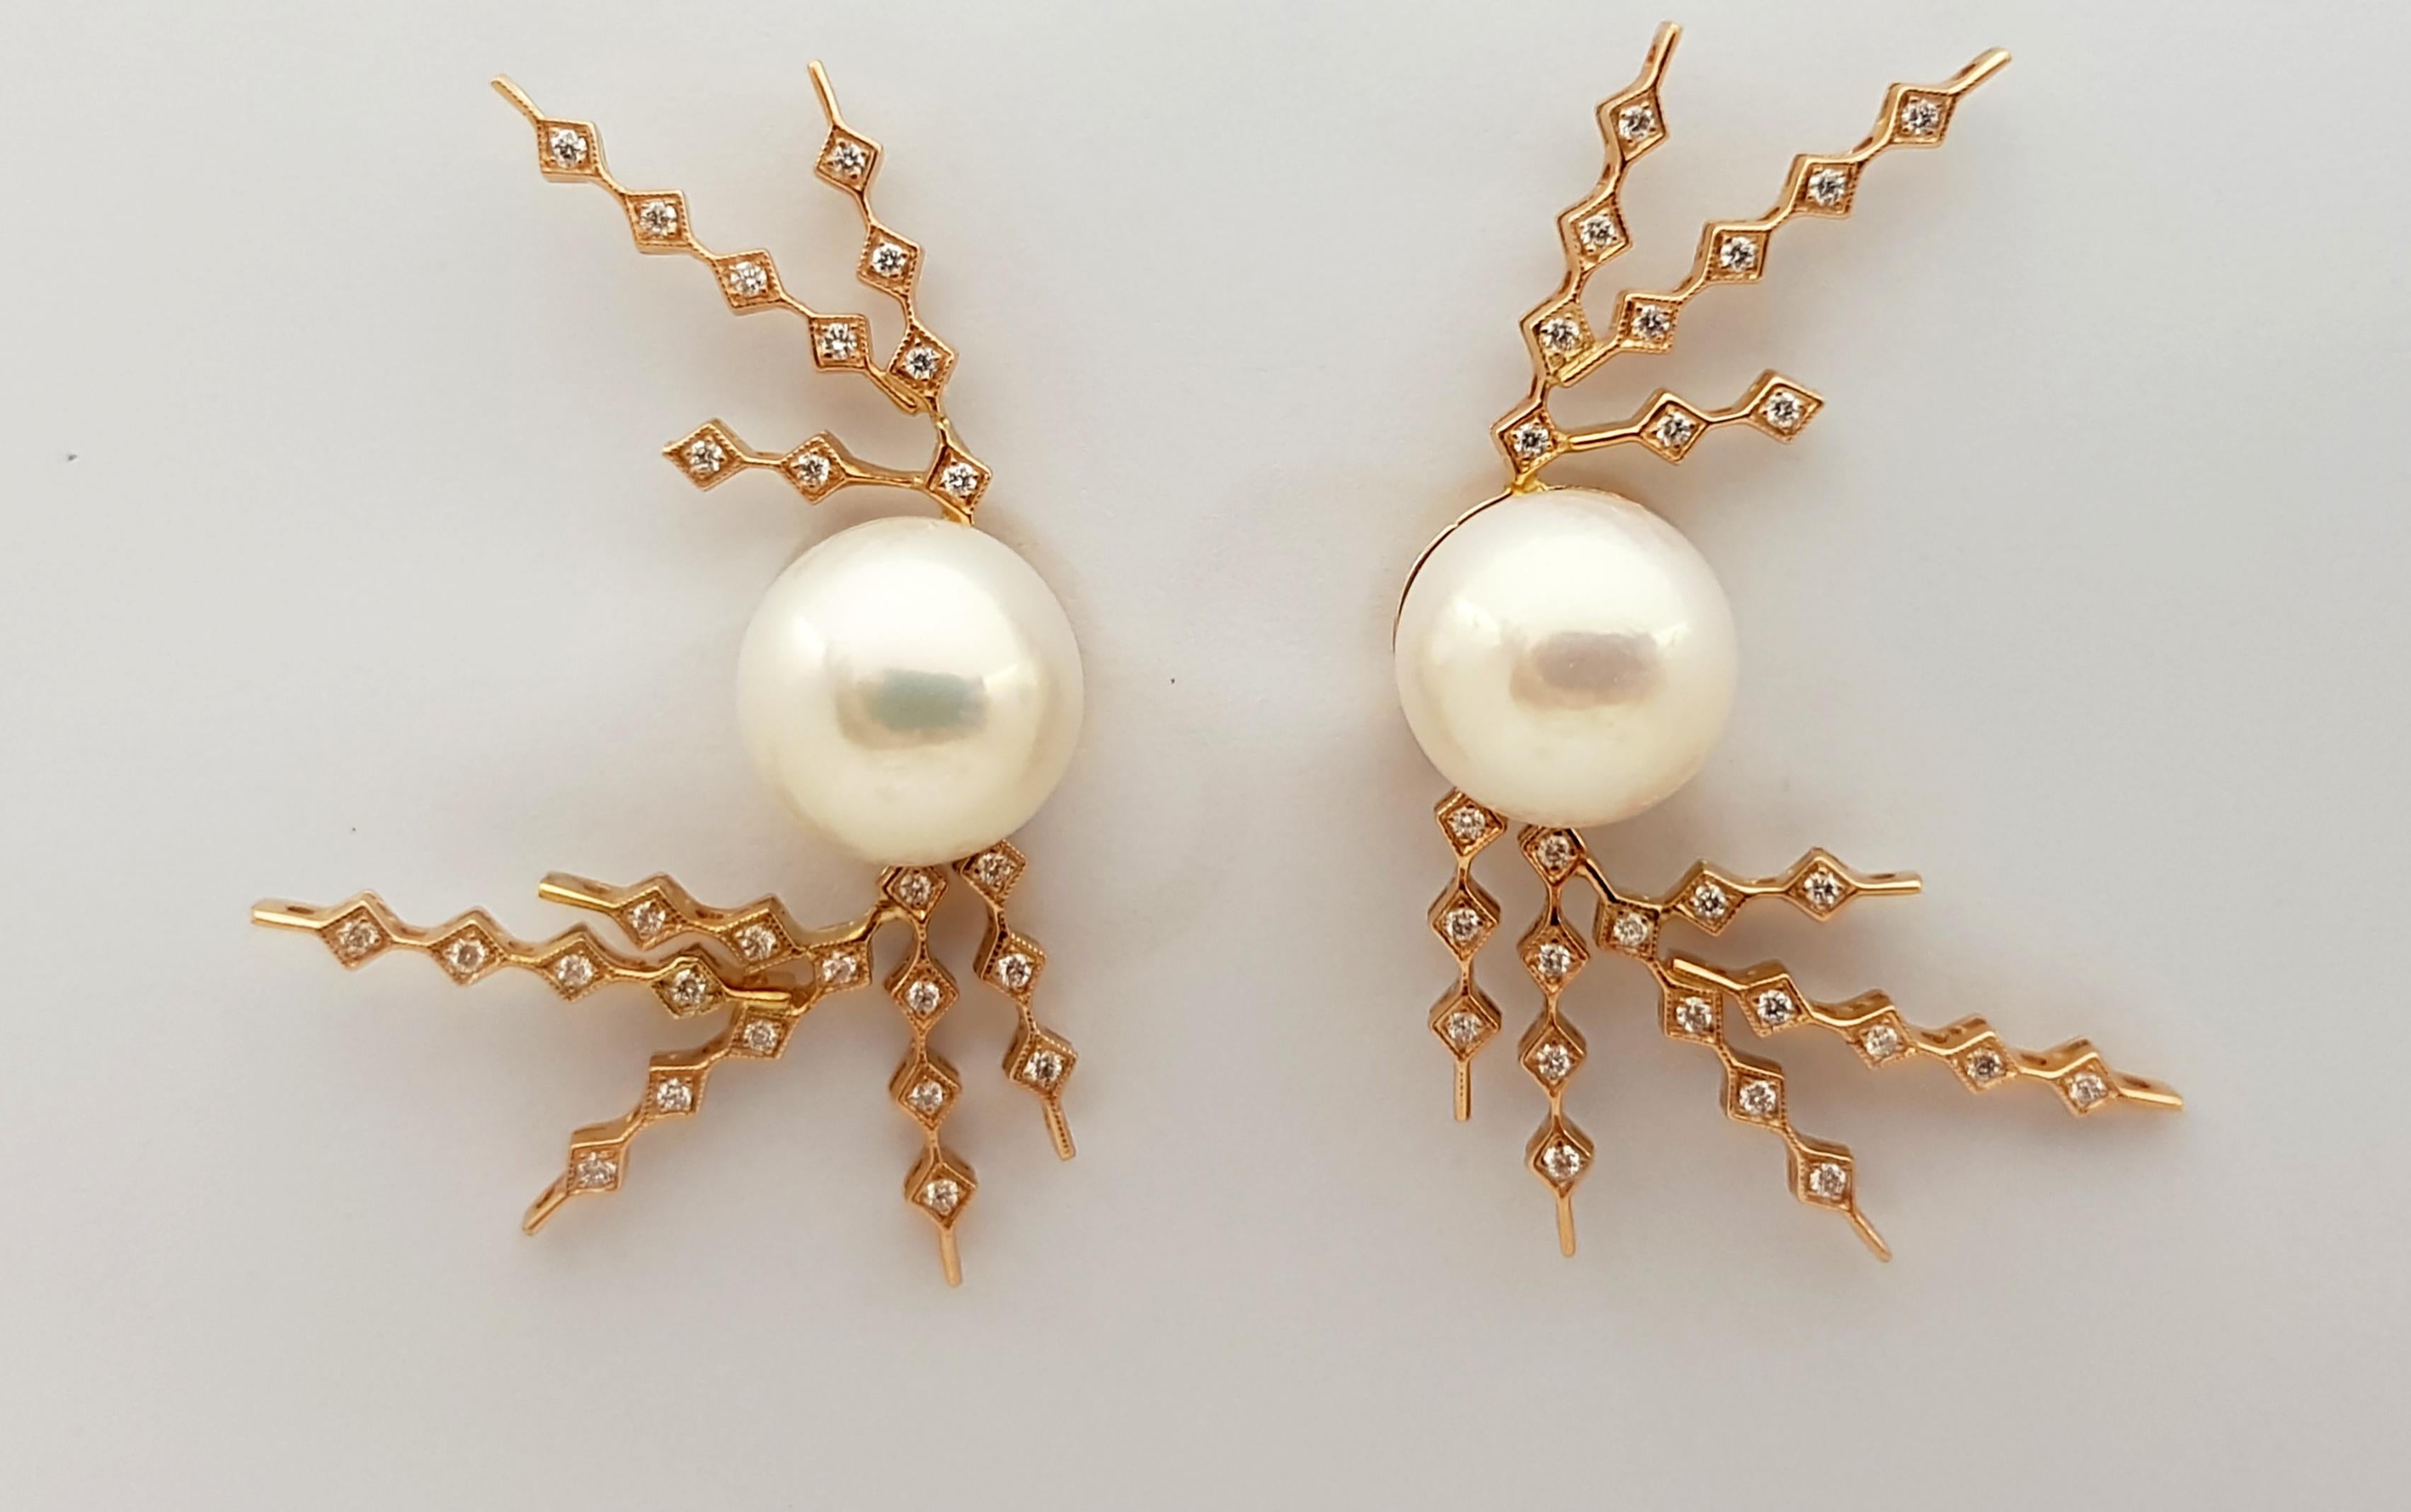 Brilliant Cut Pearl with Diamond Earrings Set in 18 Karat Rose Gold by Kavant & Sharart For Sale